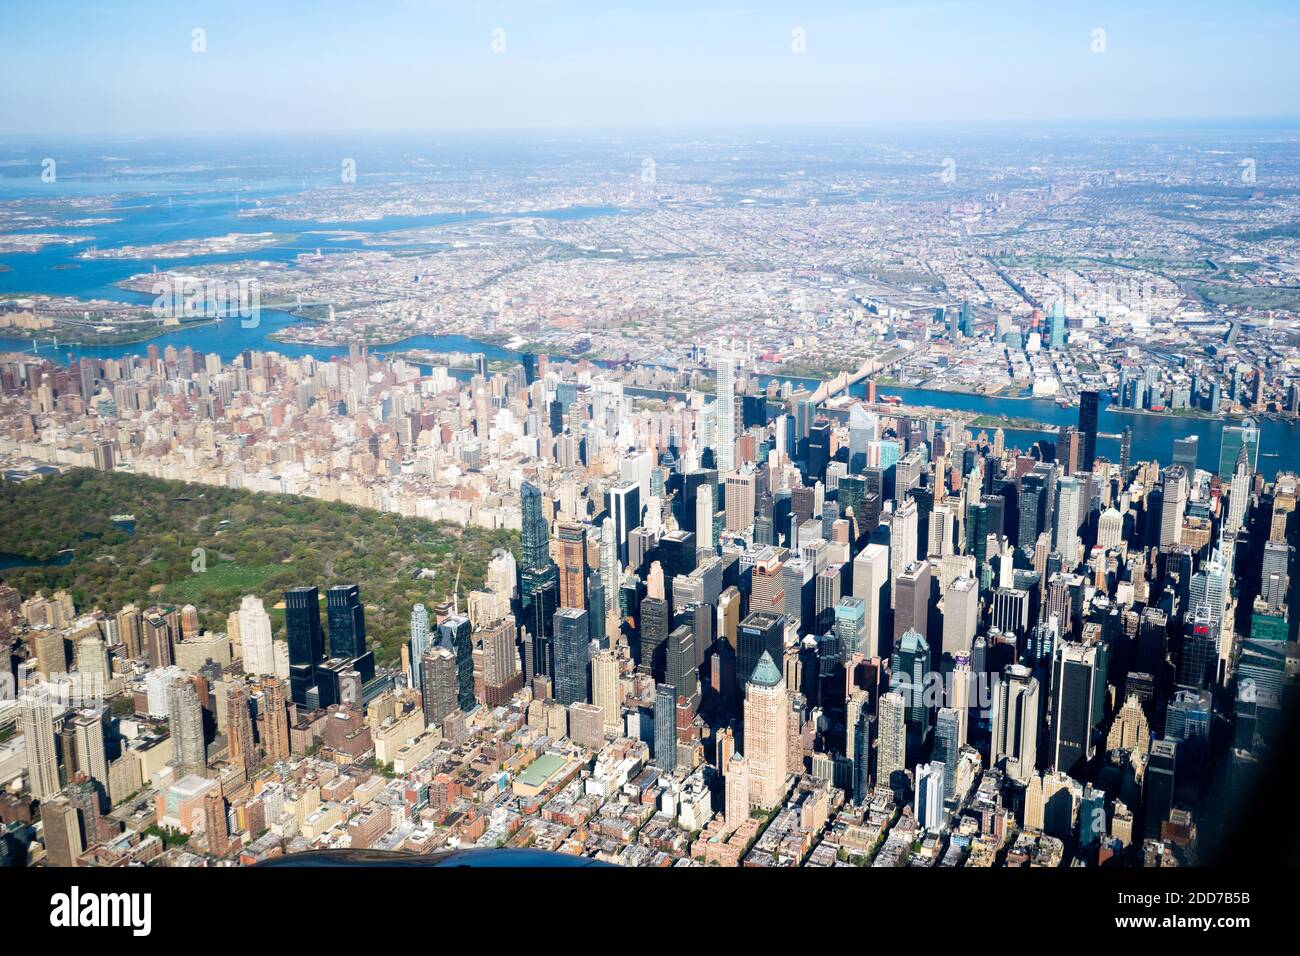 Midtown New York City skyline from above, looking northeast Stock Photo